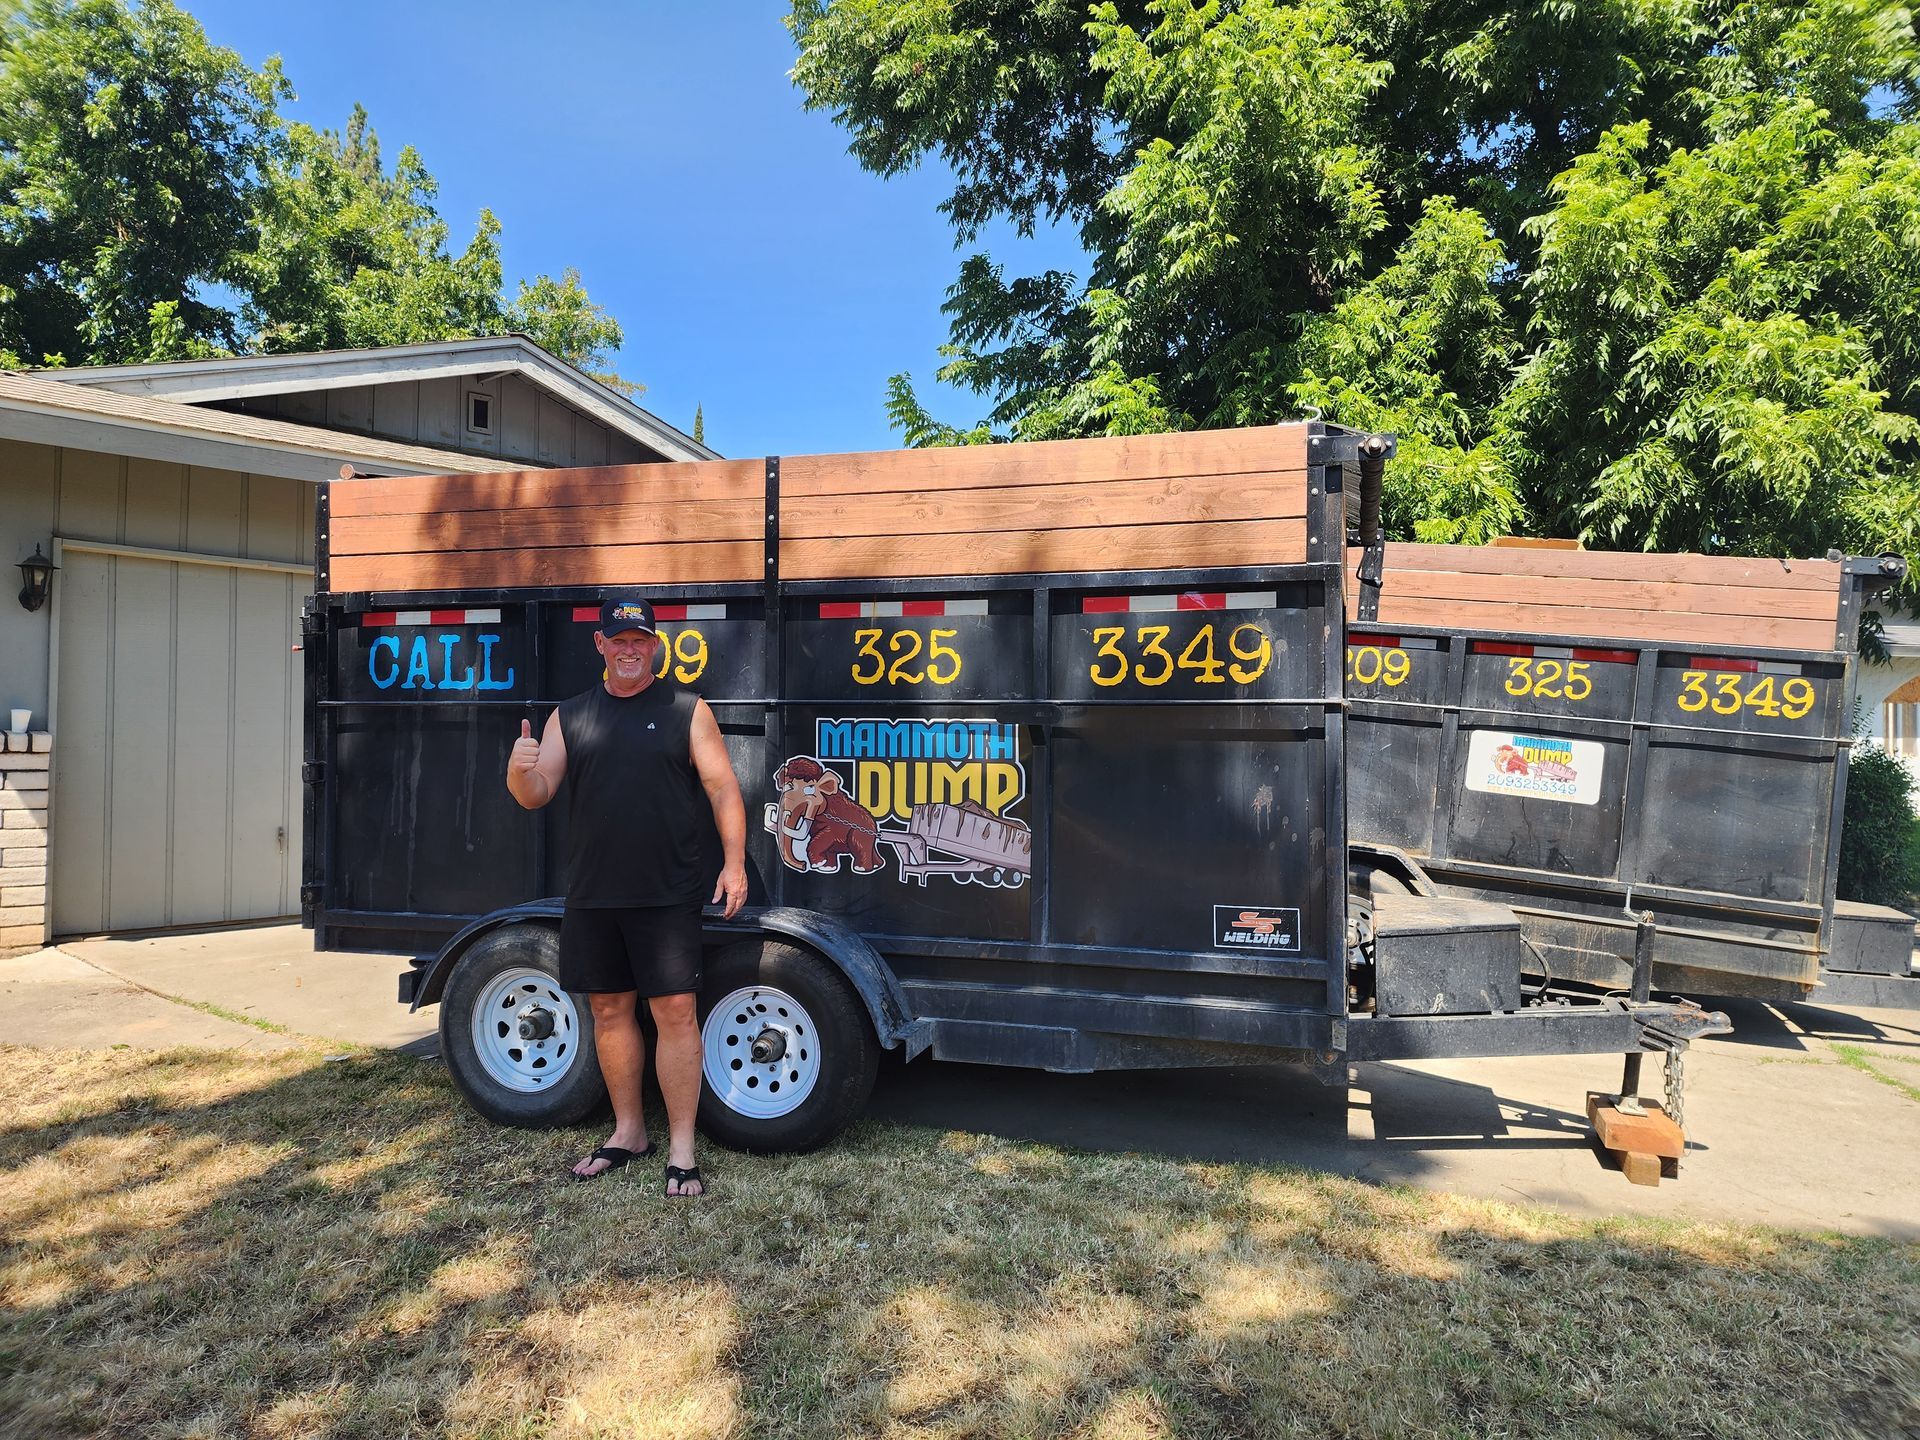 One of Mammoth Dump's satisfied customers standing in front of the 15-yard and 20-yard dumpsters he rented, holding a thumbs up and proudly wearing a Mammoth Dump hat.